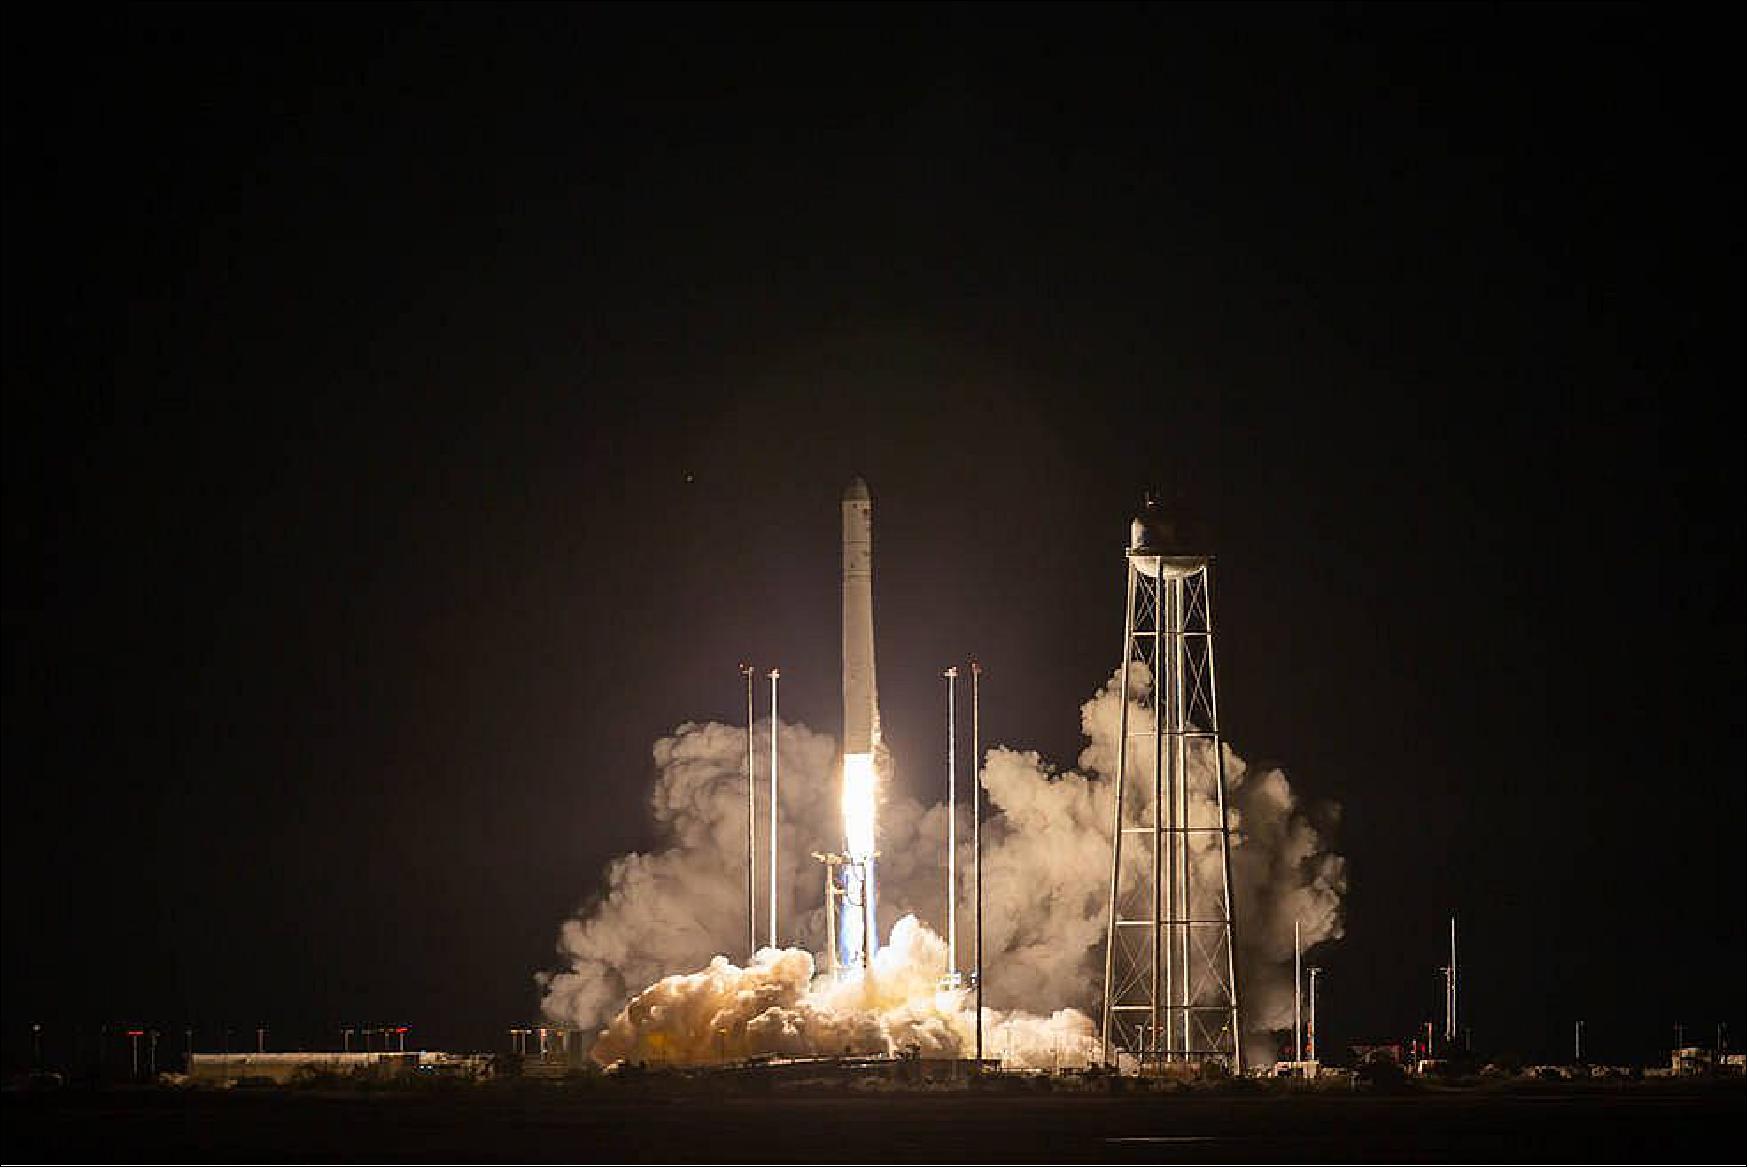 Figure 1: A Northrop Grumman Antares rocket launches to the International Space Station on Oct. 2, 2020 (9:16 p.m. EDT), from NASA's Wallops Flight Facility, Wallops Island, Virginia. The rocket is carrying a Cygnus spacecraft with 8,000 pounds of supplies and experiments (image credit: NASA Wallops, Patrick Black)